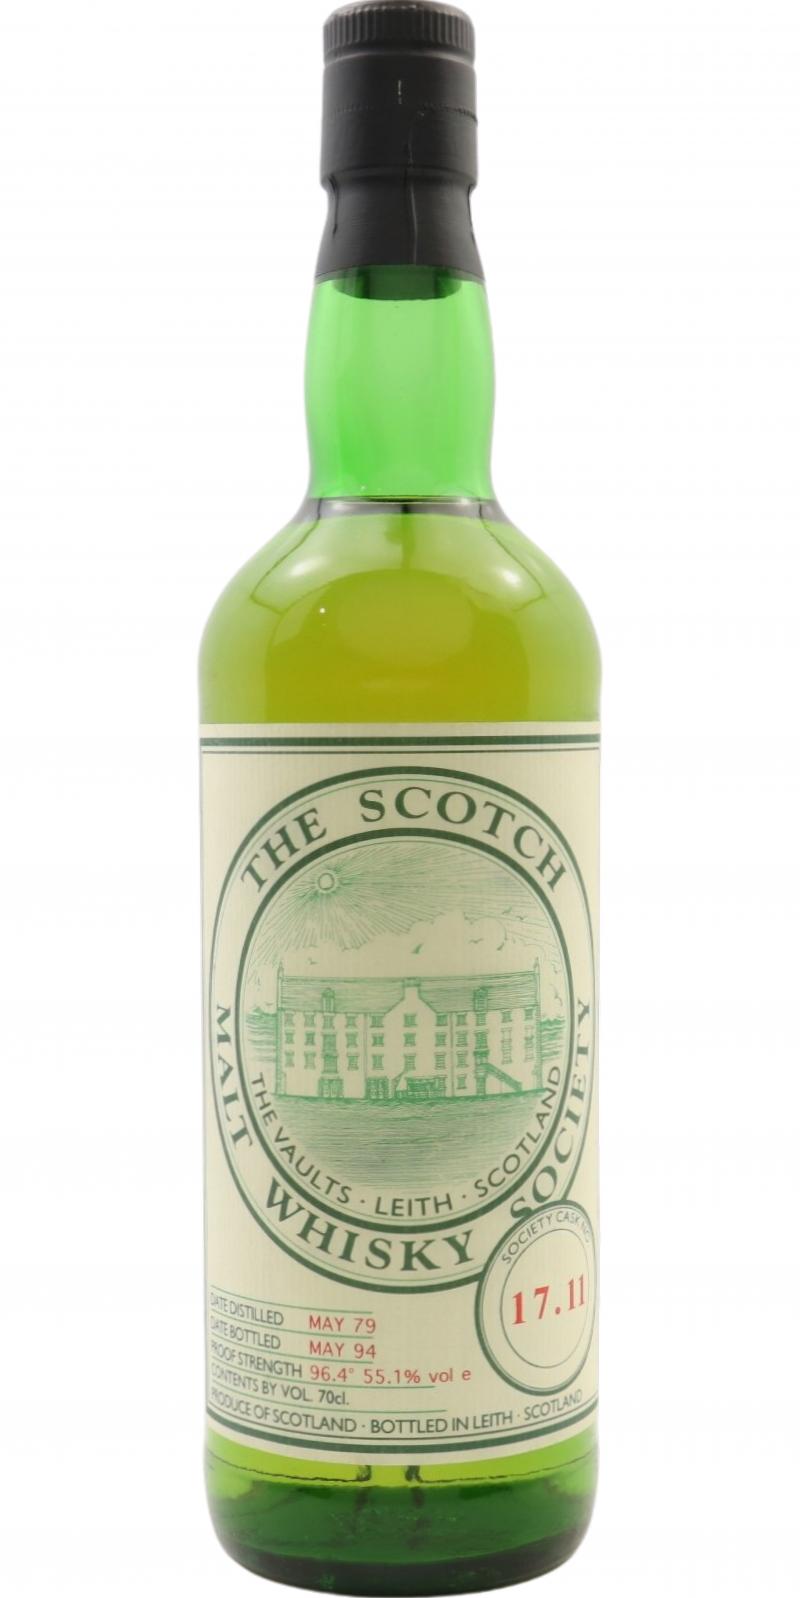 Scapa 1979 SMWS 17.11 Fit for A ship's galley Refill Sherry Cask 17.11 55.1% 700ml